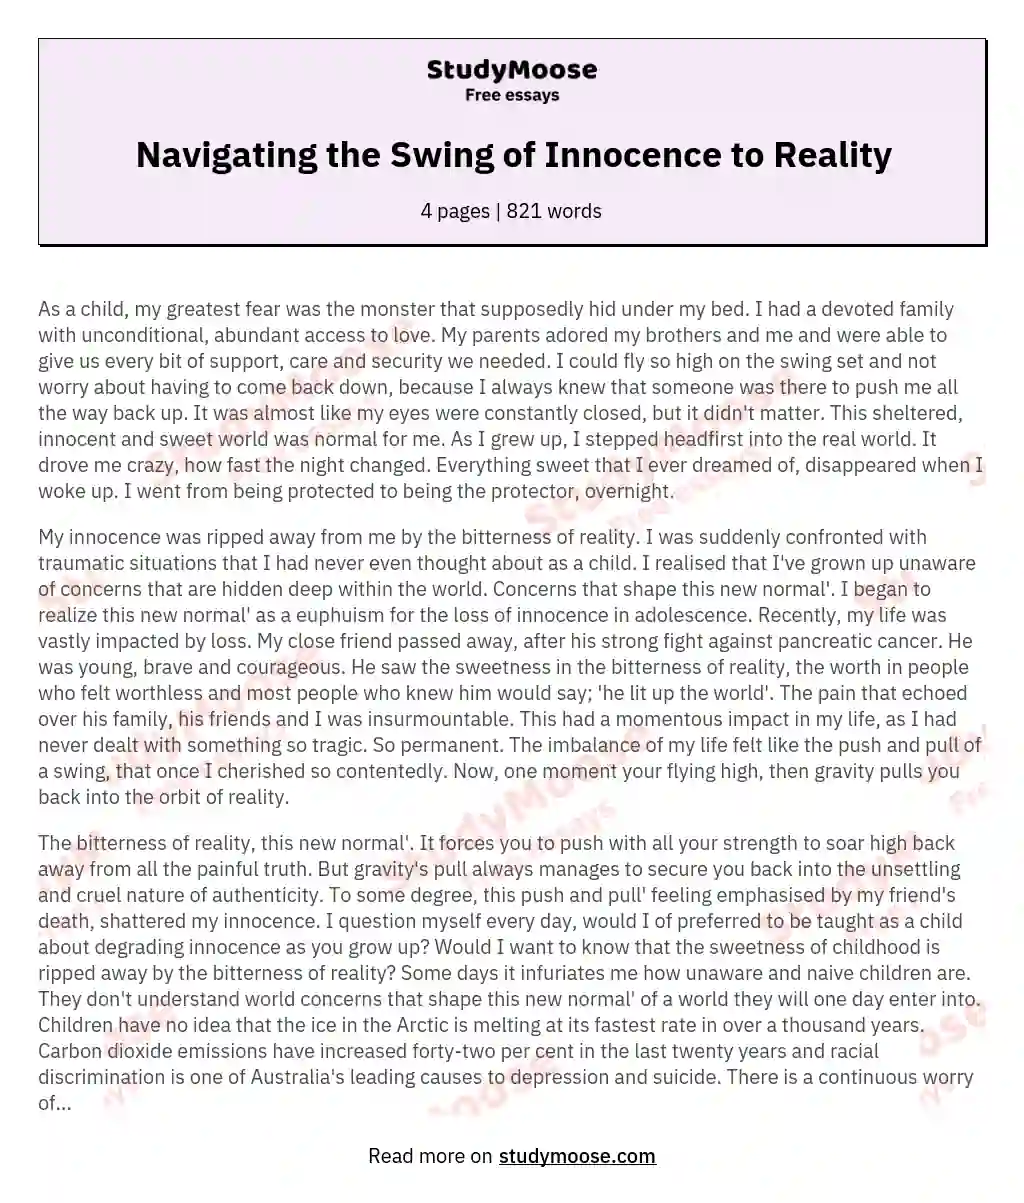 Navigating the Swing of Innocence to Reality essay